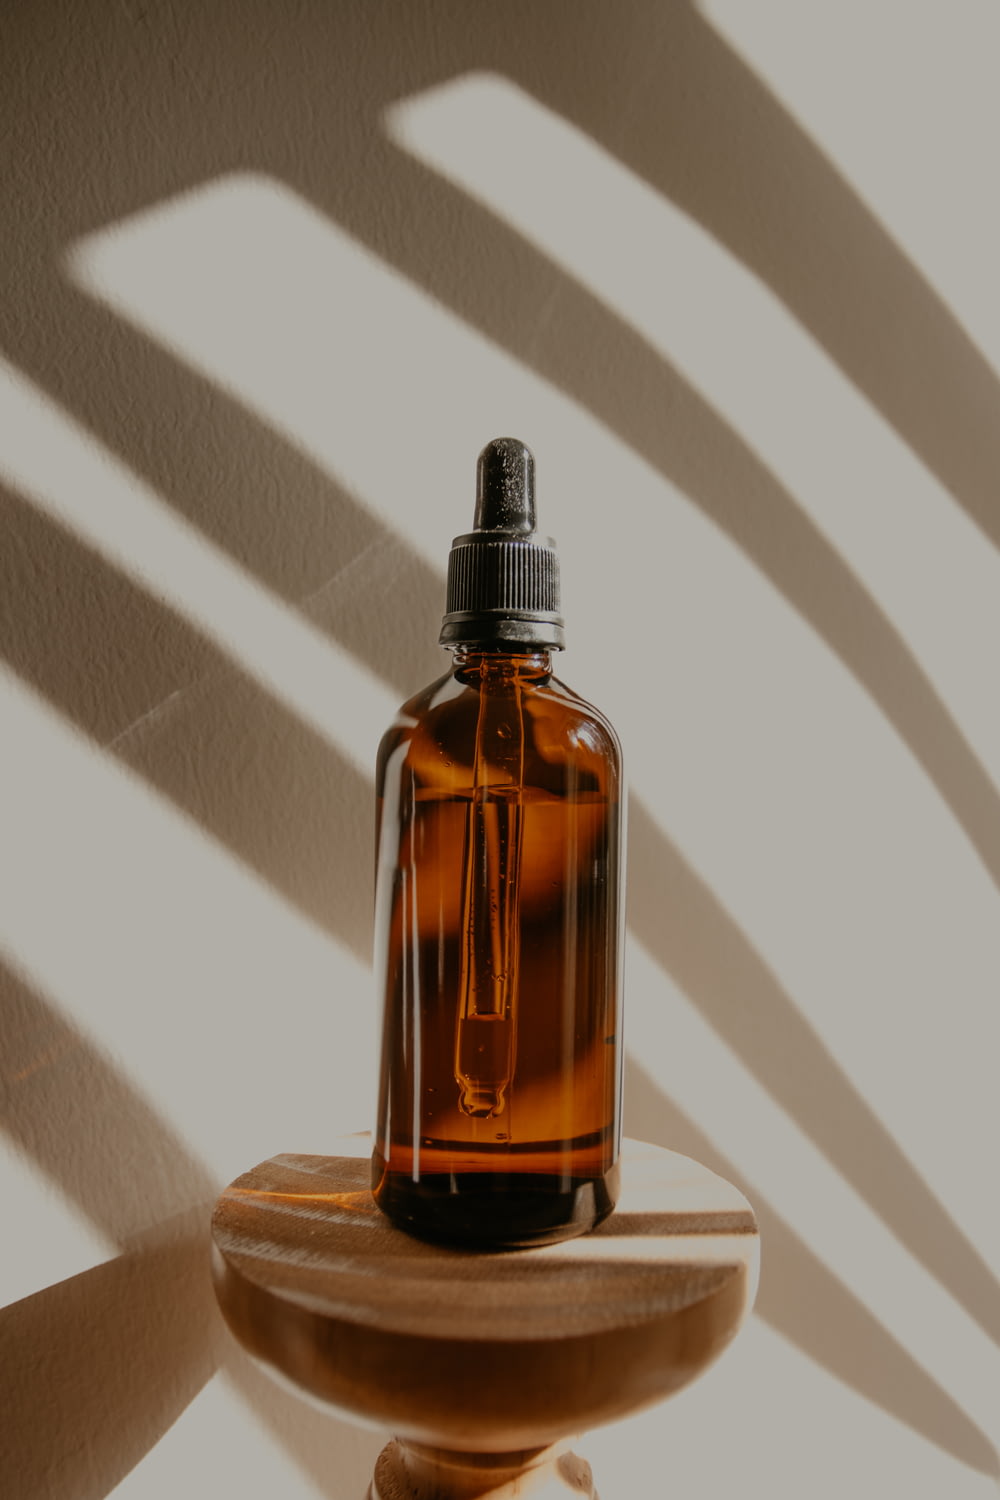 clear glass bottle on brown wooden table